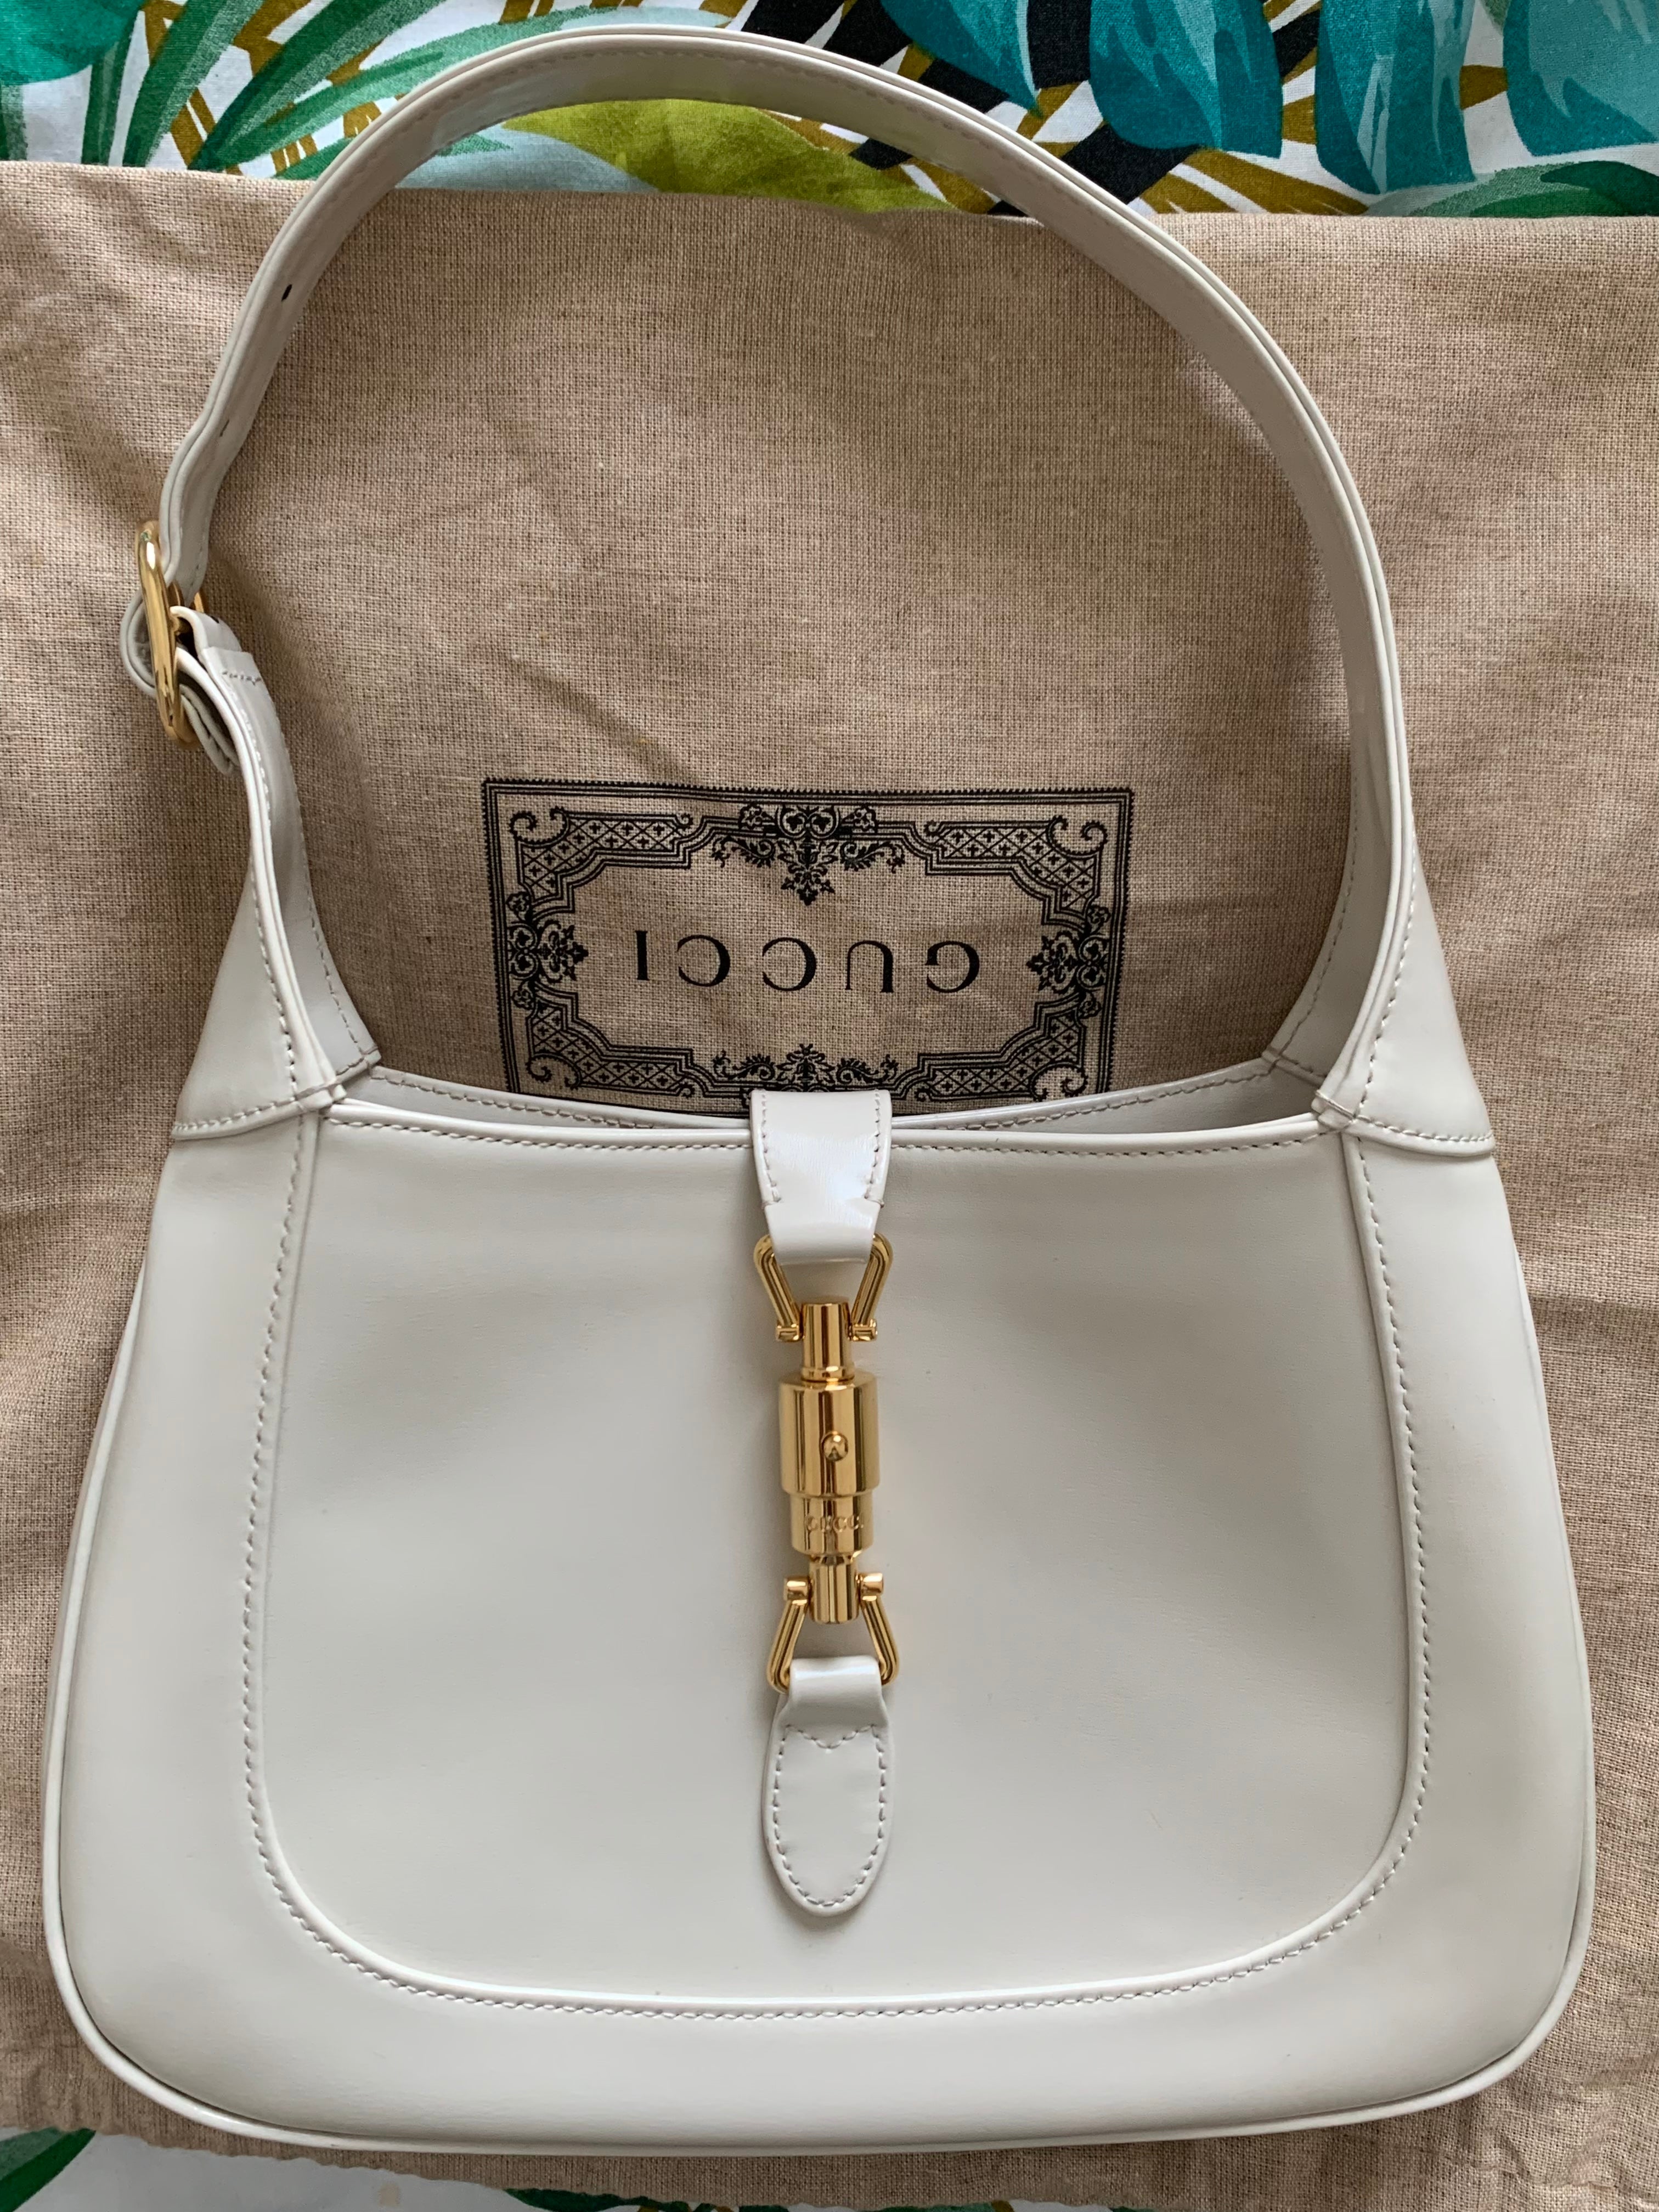 How To Authenticate the Gucci Jackie Bag